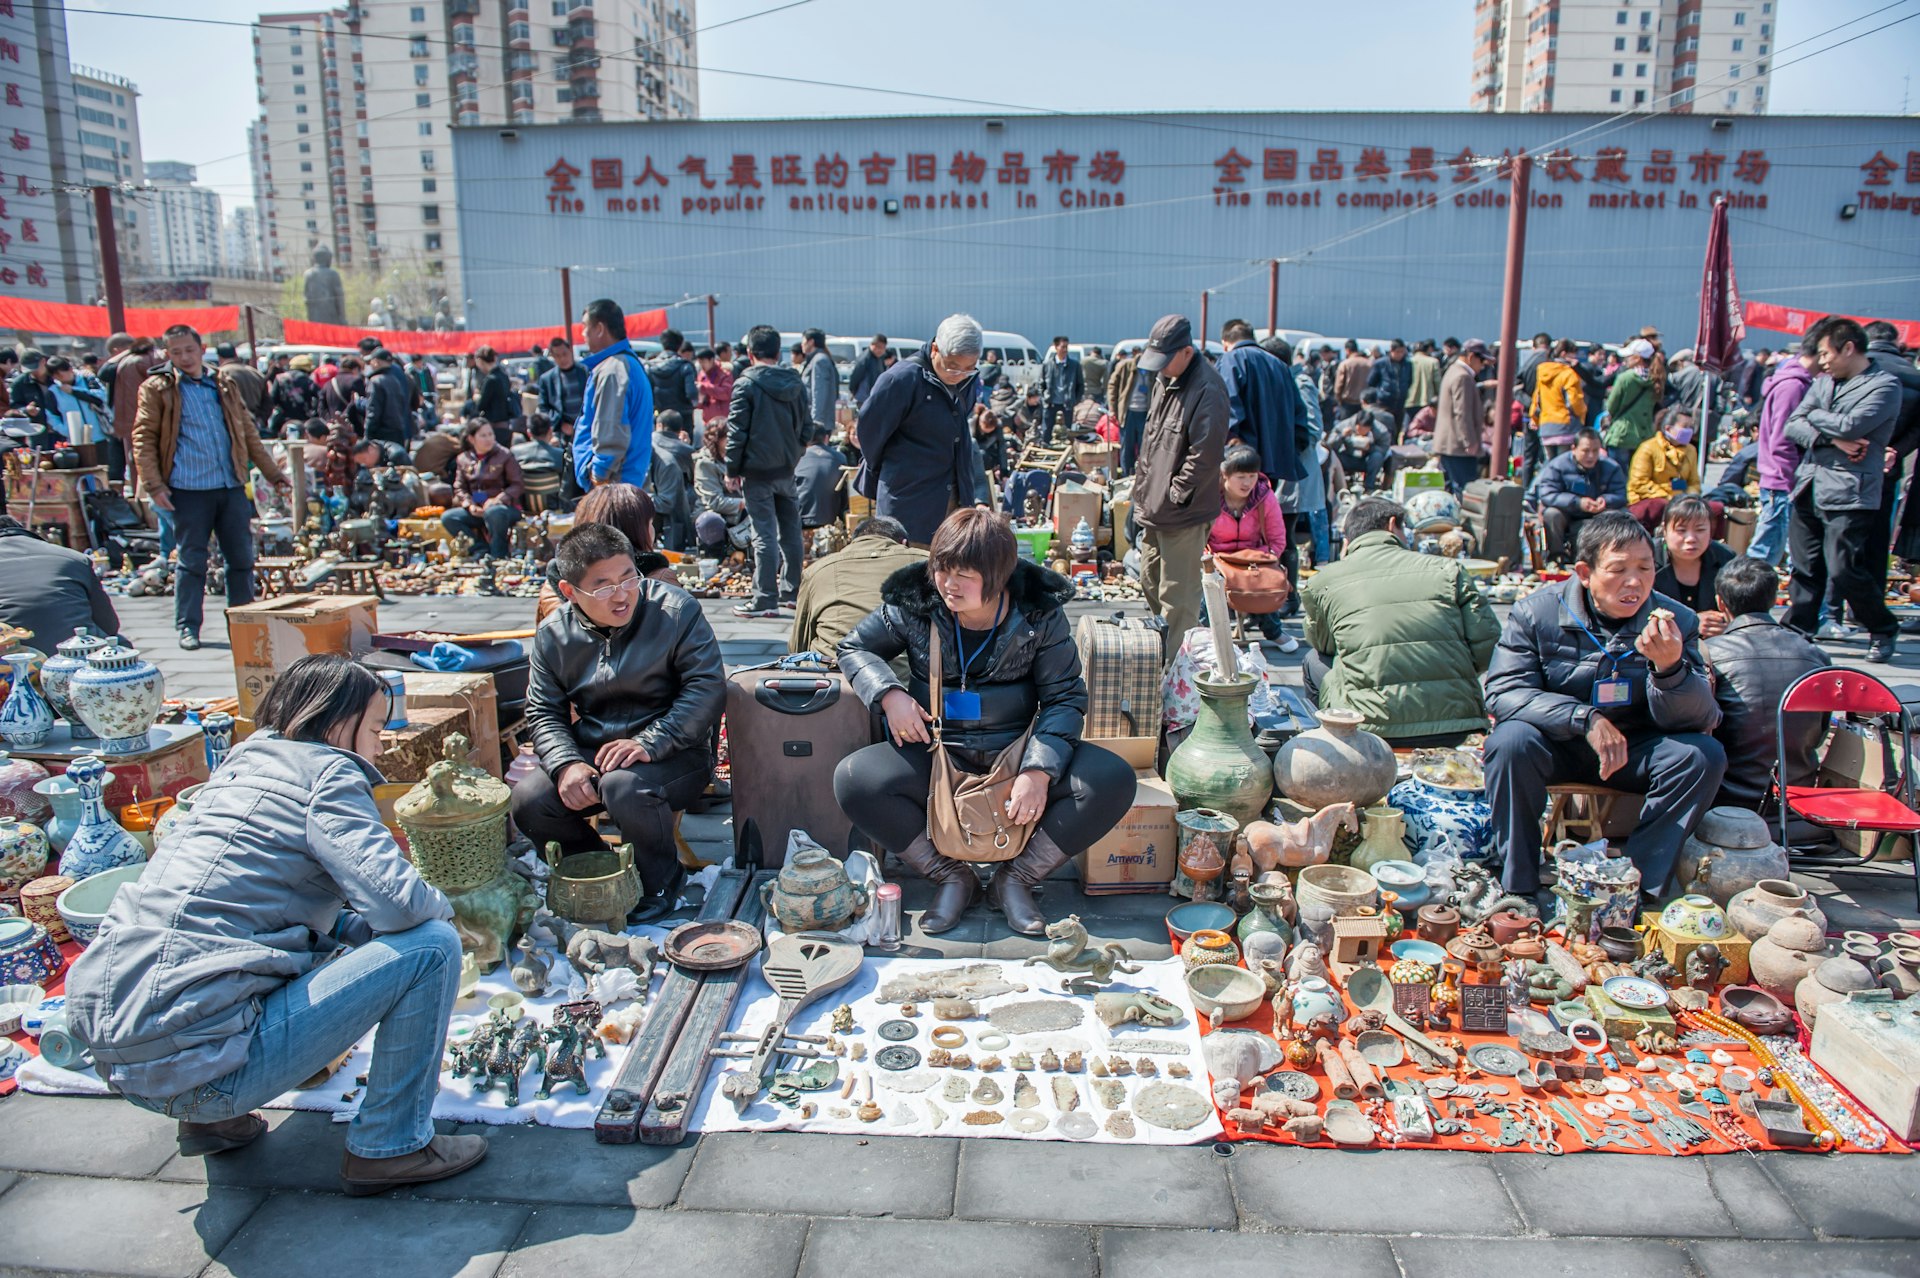 People gather in front of vendors at Panjiayuan market in Beijing